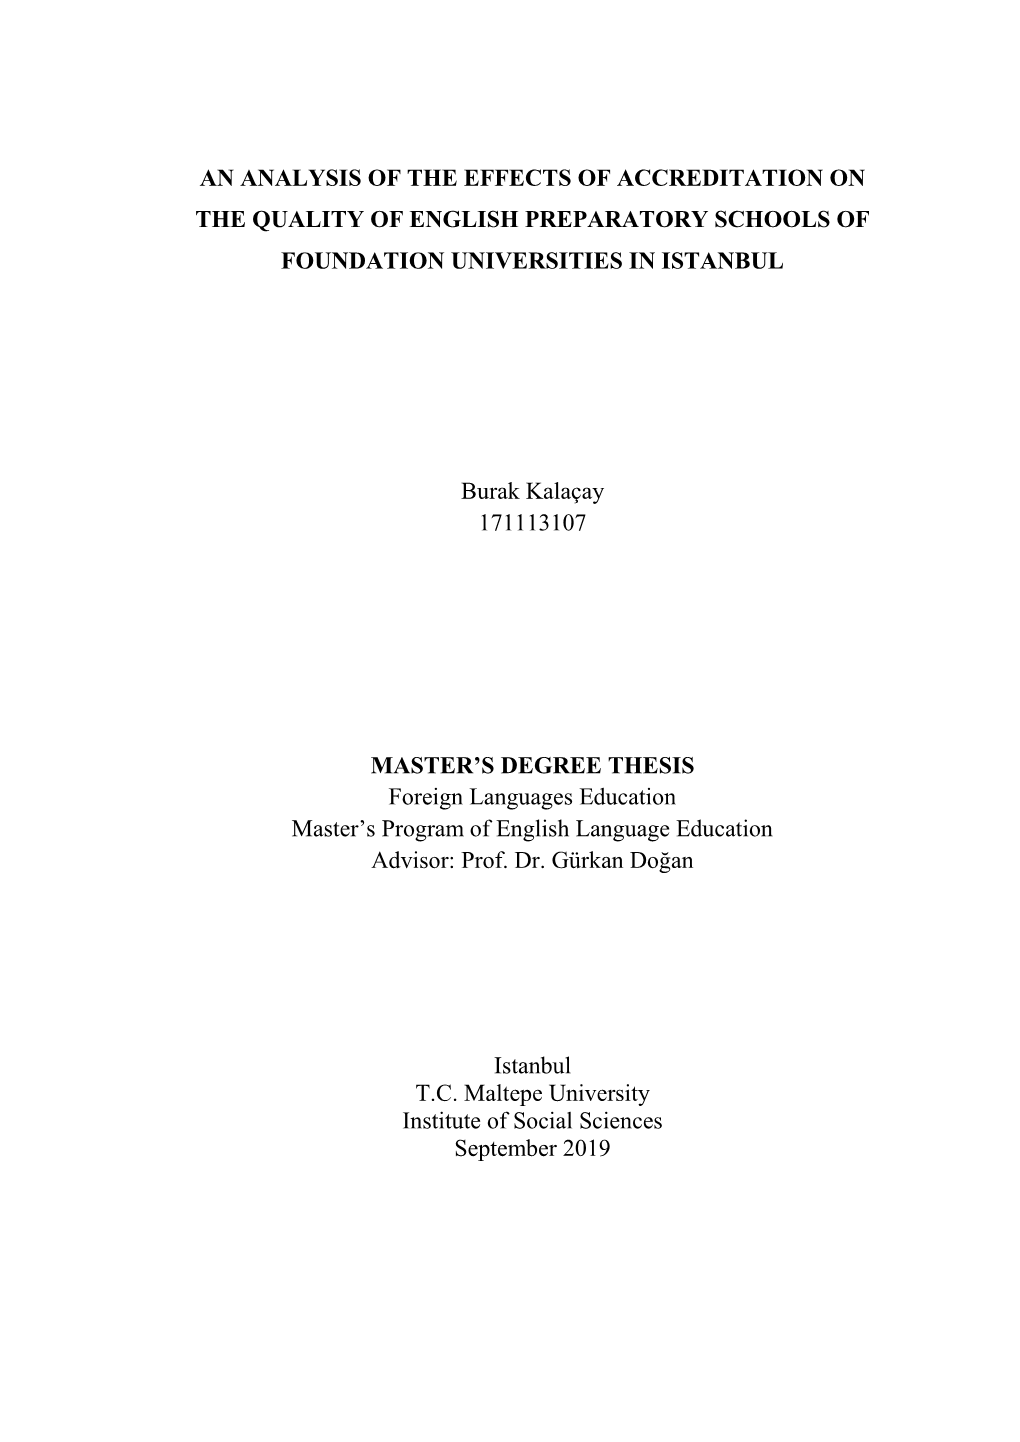 An Analysis of the Effects of Accreditation on the Quality of English Preparatory Schools of Foundation Universities in Istanbul